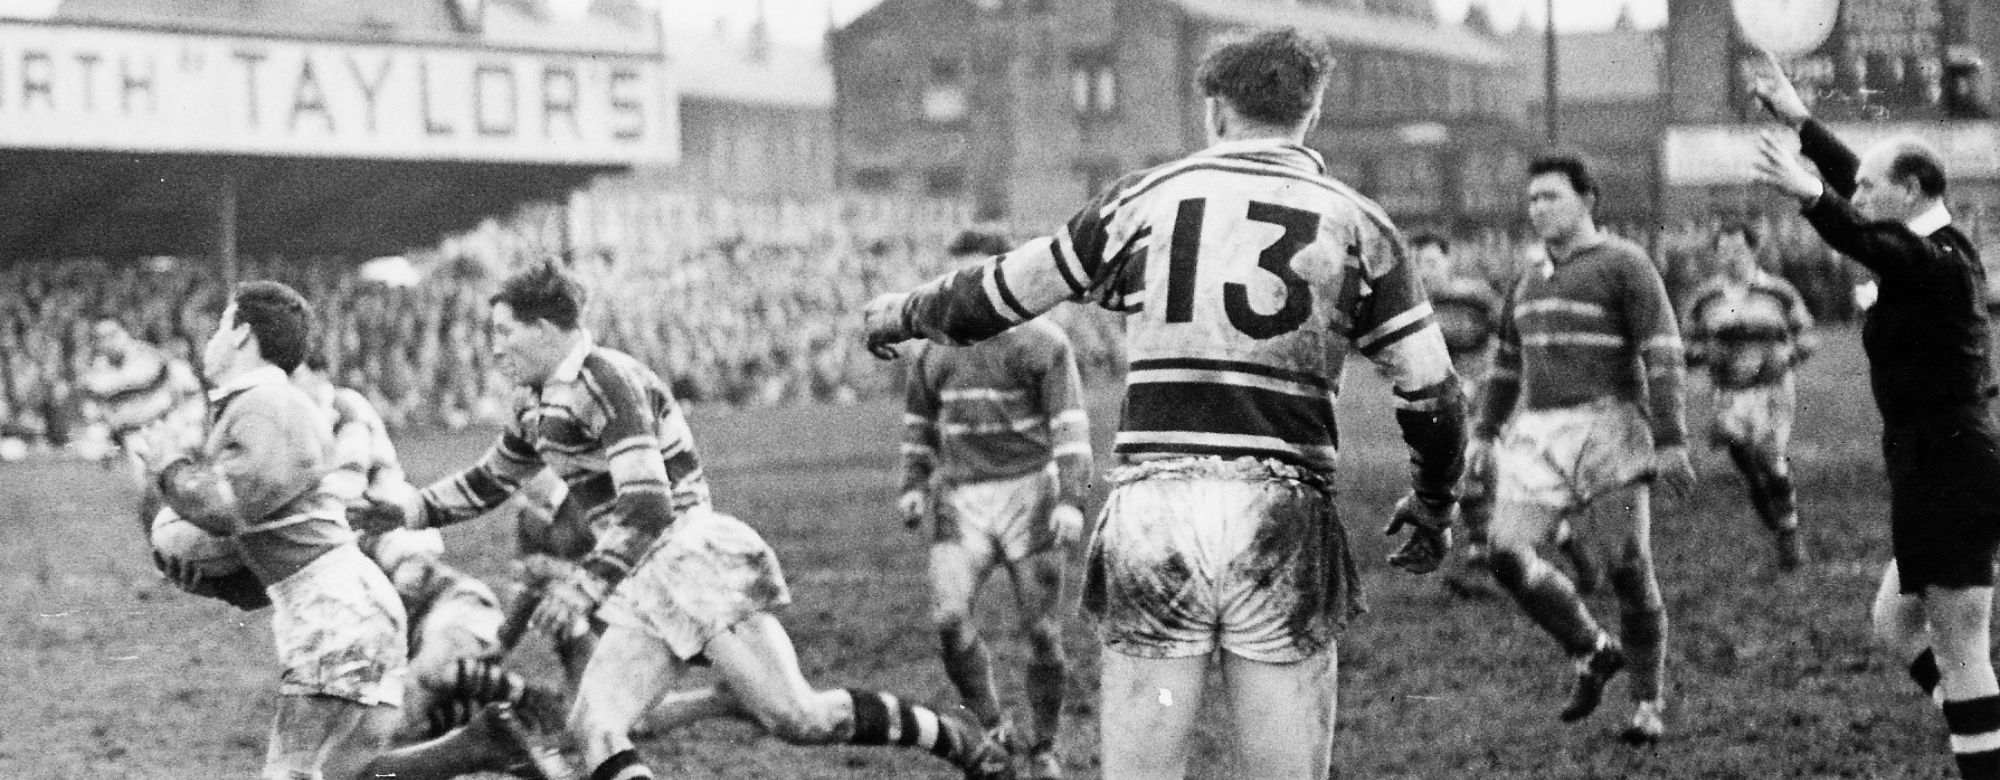 Johnny Whiteley MBE & The 1950 Christmas Day Derby!